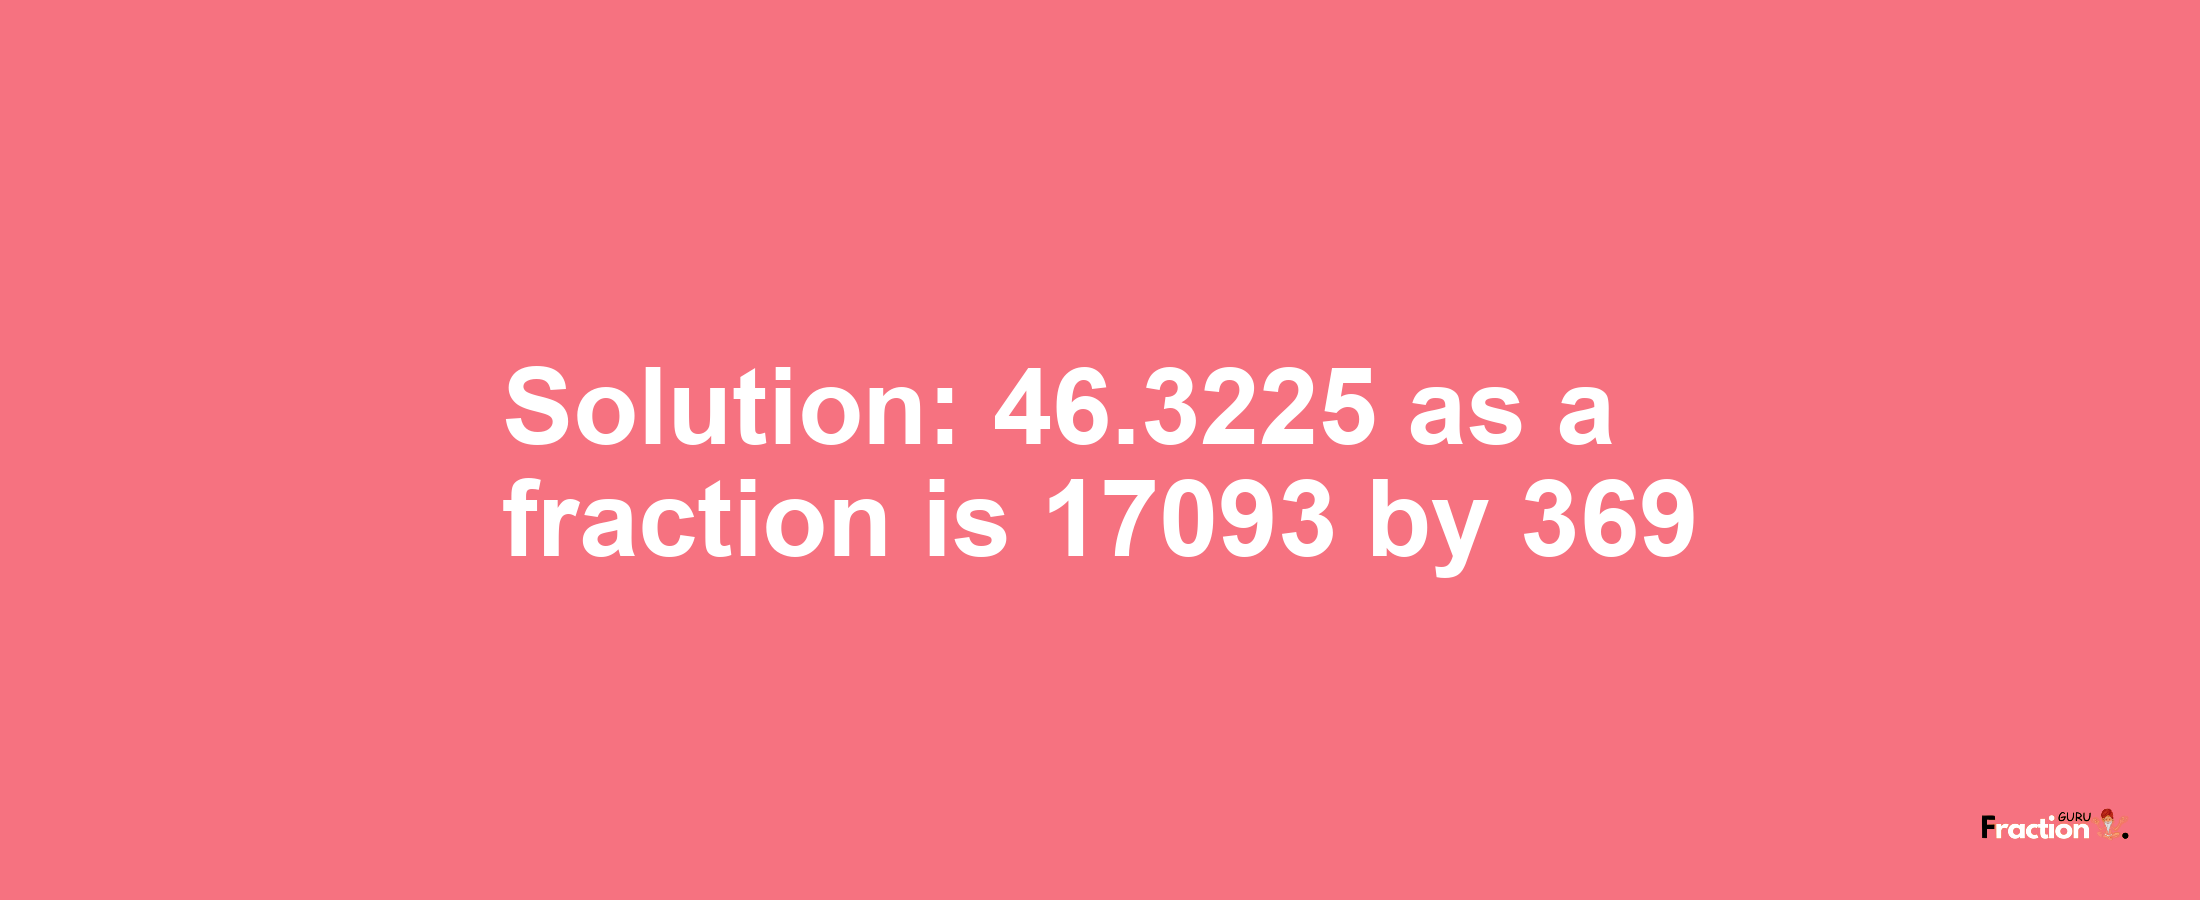 Solution:46.3225 as a fraction is 17093/369